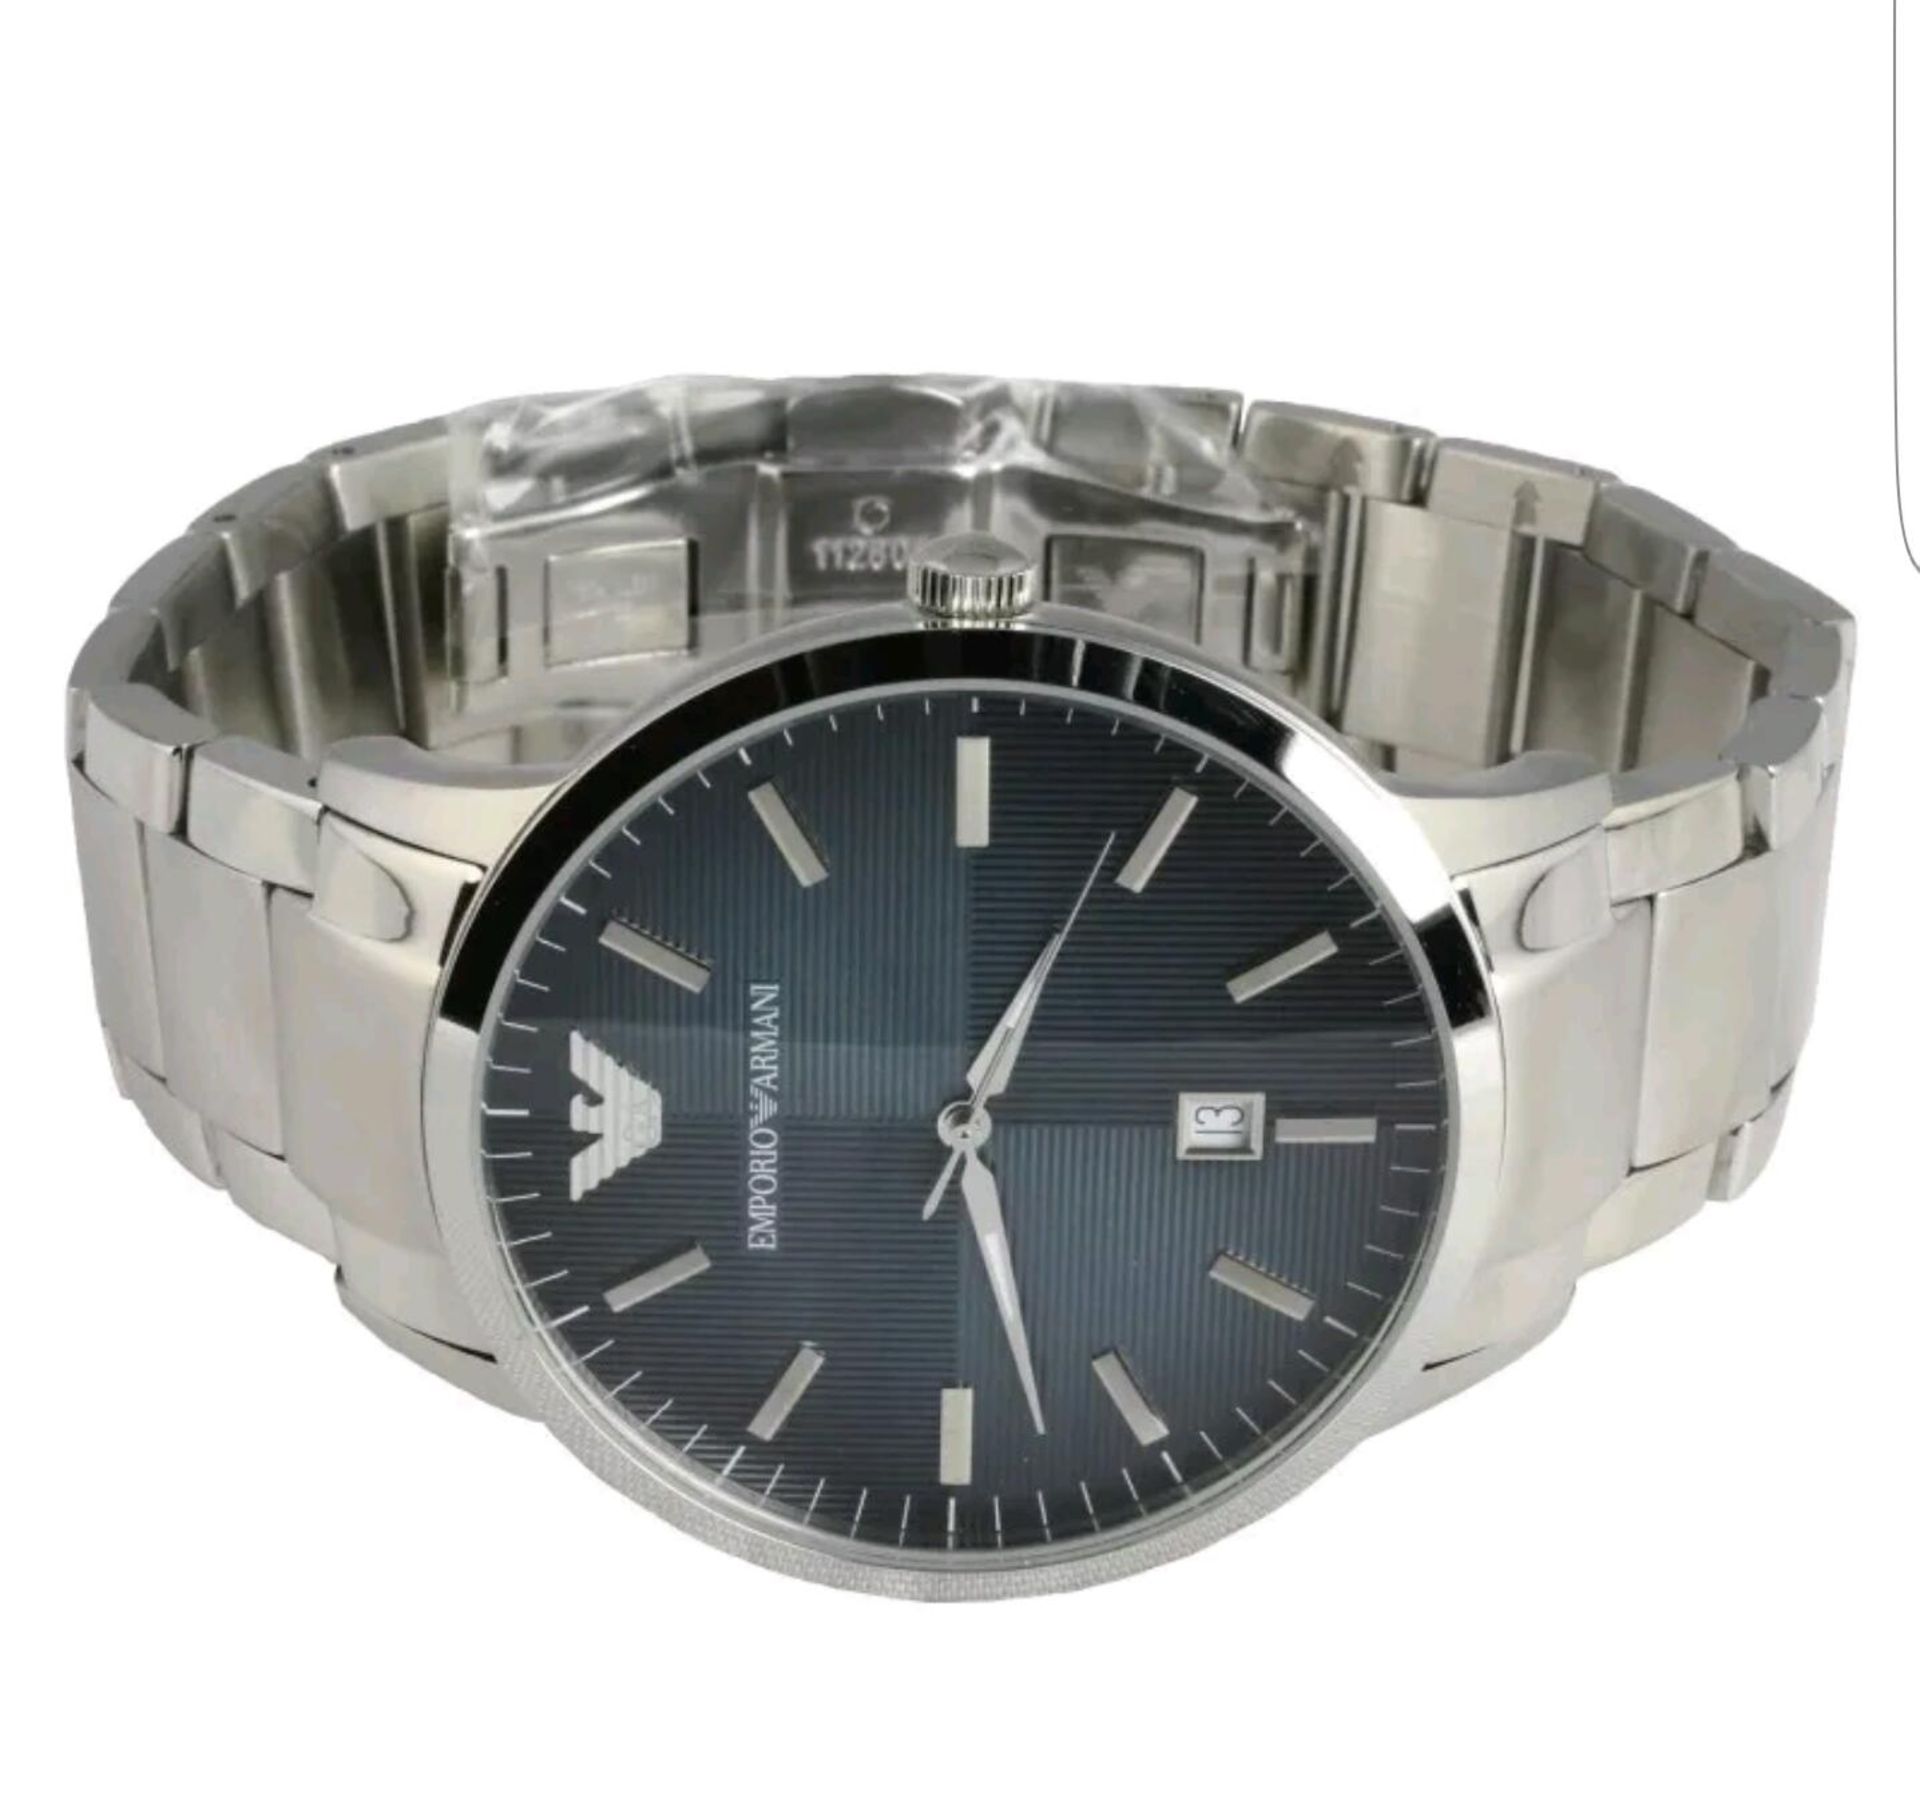 BRAND NEW GENTS EMPORIO ARMANI , AR2472, COMPLETE WITH ORIGINAL BOX, MANUAL AND CERTIFICATE - RRP £ - Image 2 of 2